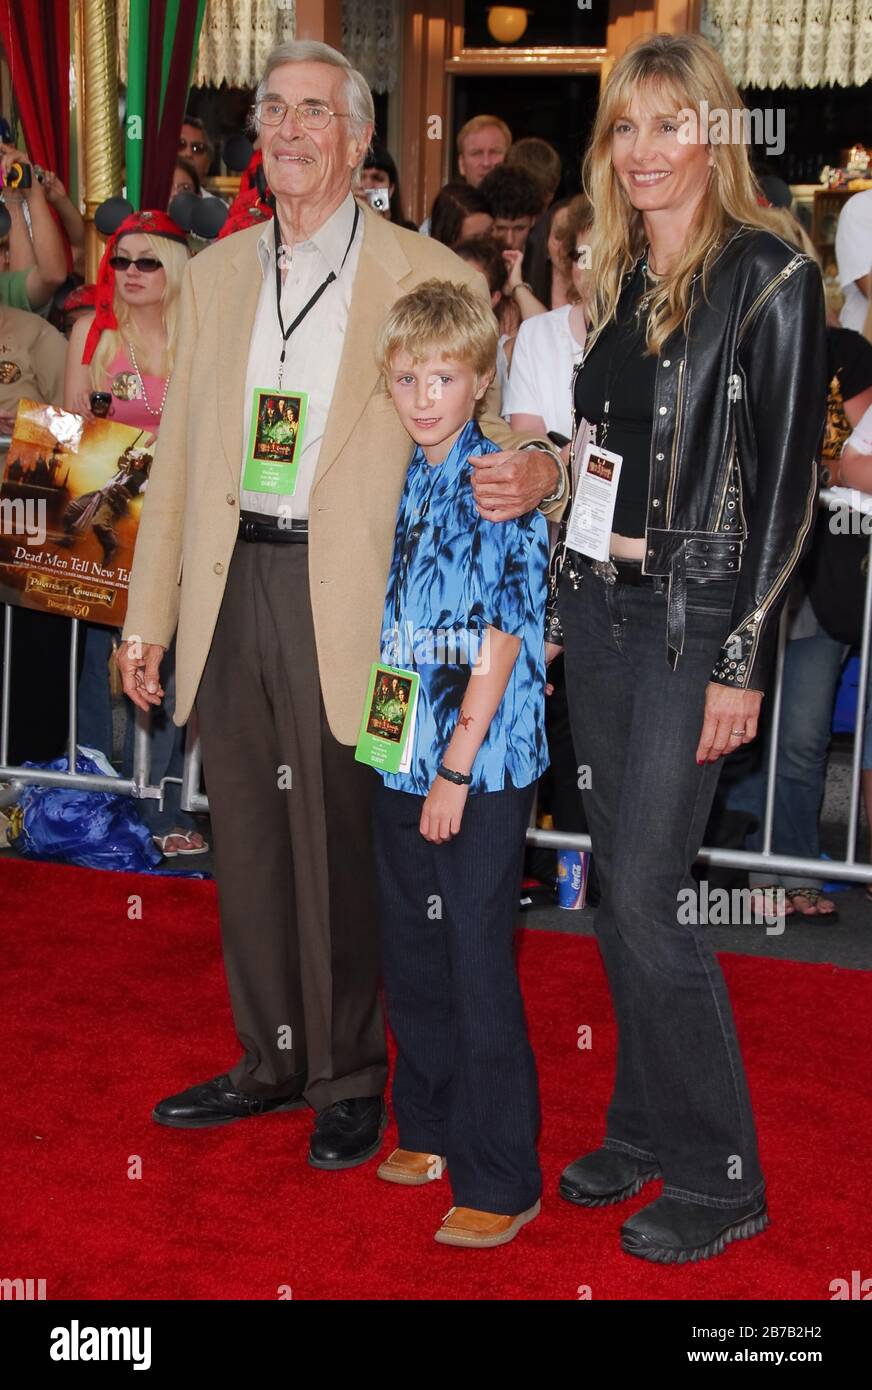 Martin Landau and Family at the World Premiere of Walt Disney Pictures' 'Pirates Of The Caribbean: Dead Man's Chest' held at Disneyland in Anaheim, CA. The event took place on Saturday, June 24, 2006.  Photo by: SBM / PictureLux Stock Photo